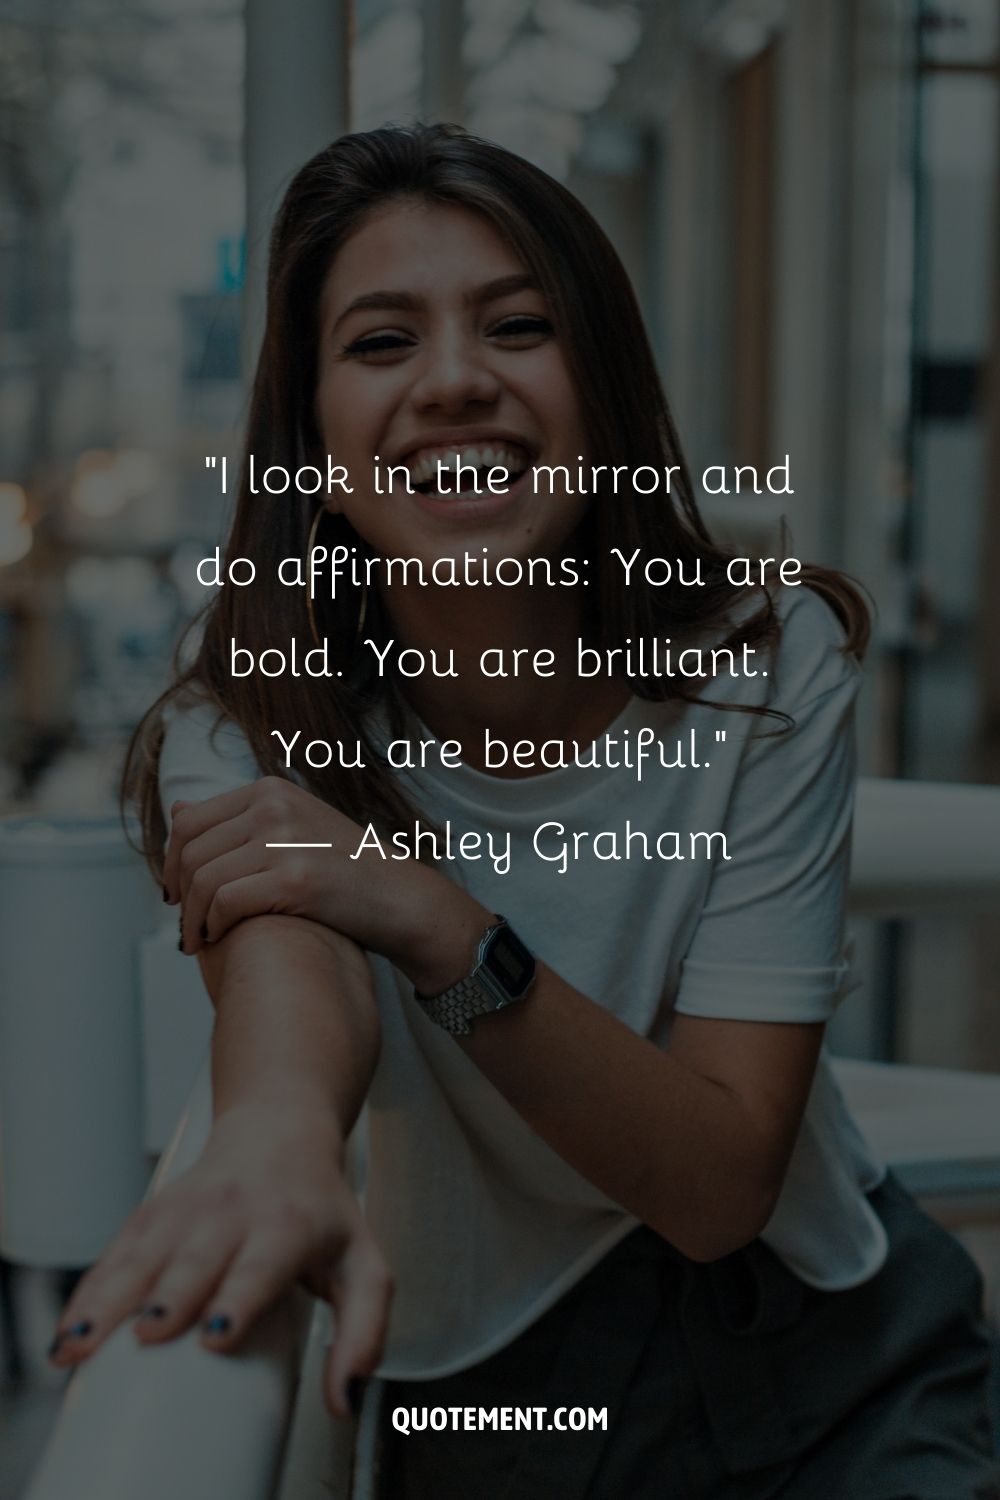 “I look in the mirror and do affirmations You are bold. You are brilliant. You are beautiful. — Ashley Graham